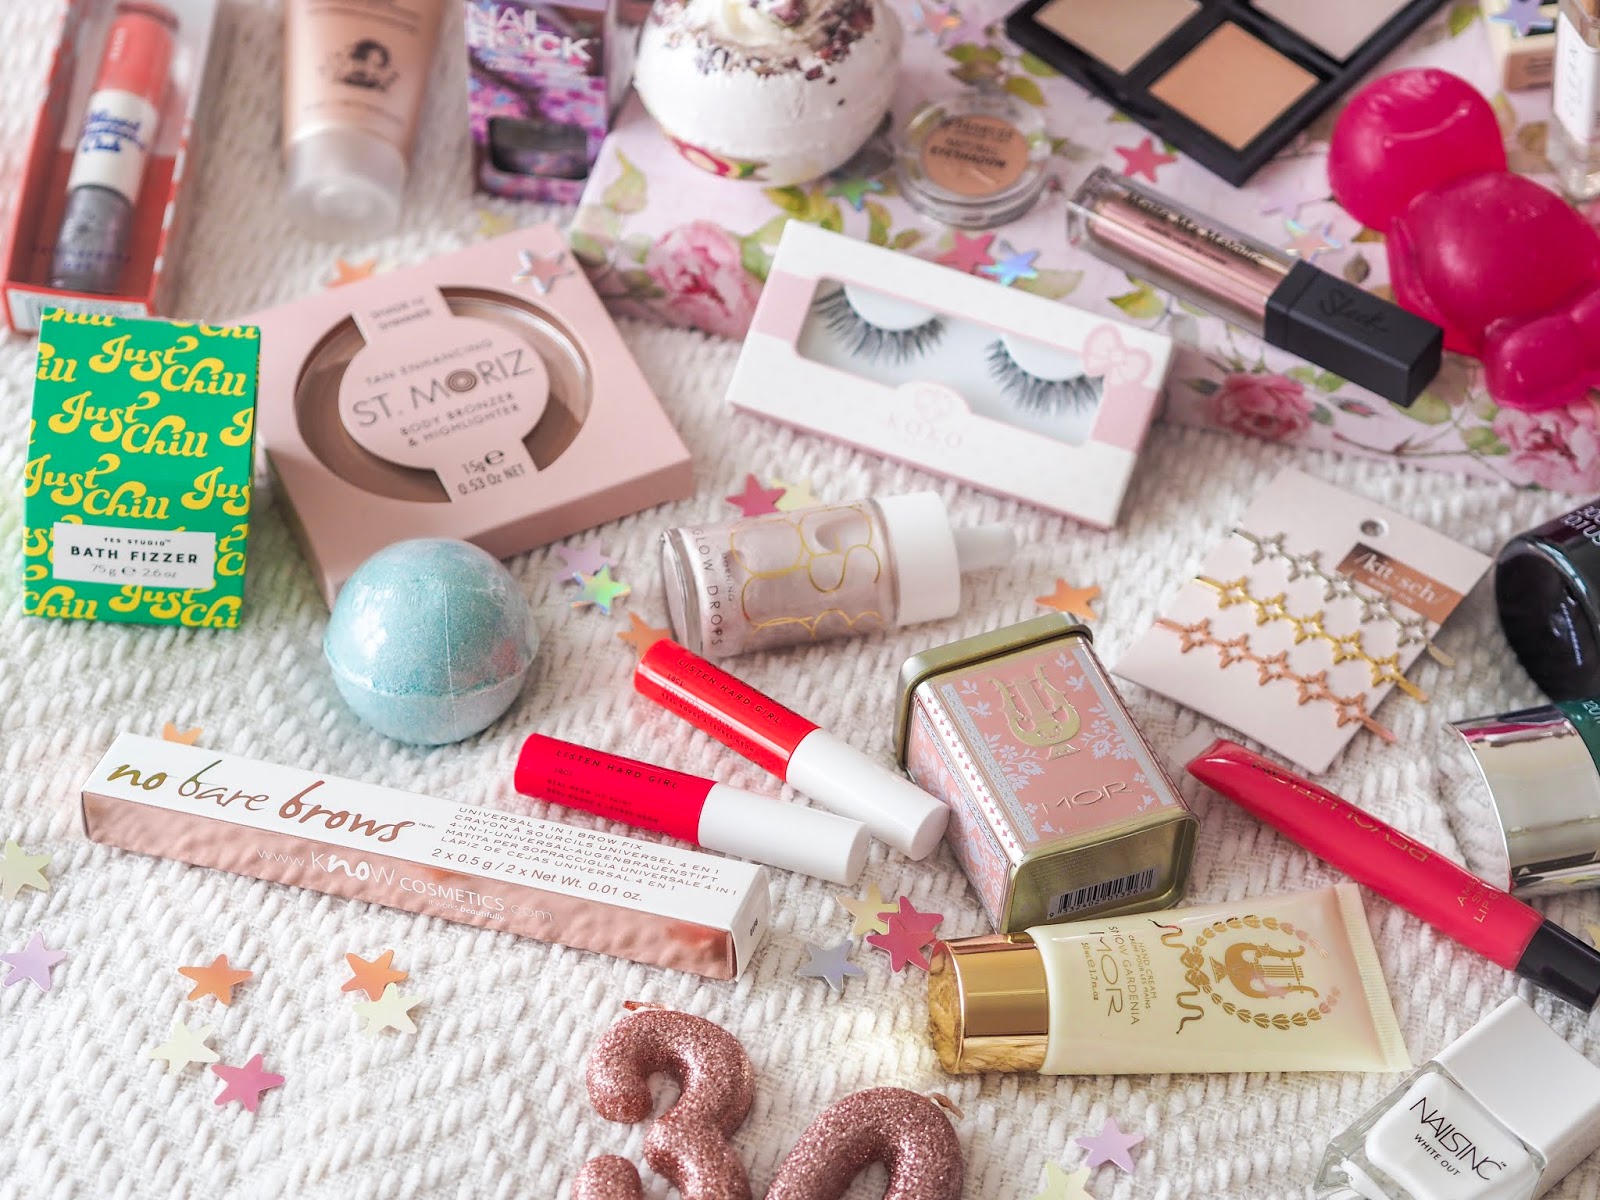 Giveaway: Celebrating 30 Years of Being Alive!, Katie Kirk Loves, UK Blogger, Beauty Blogger, Fashion Blogger, UK Influencer, Blog Giveaway, UK Giveway, Beauty Giveaway, Enter To Win, Competition, Prize, Win It Wednesday, Freebie Friday